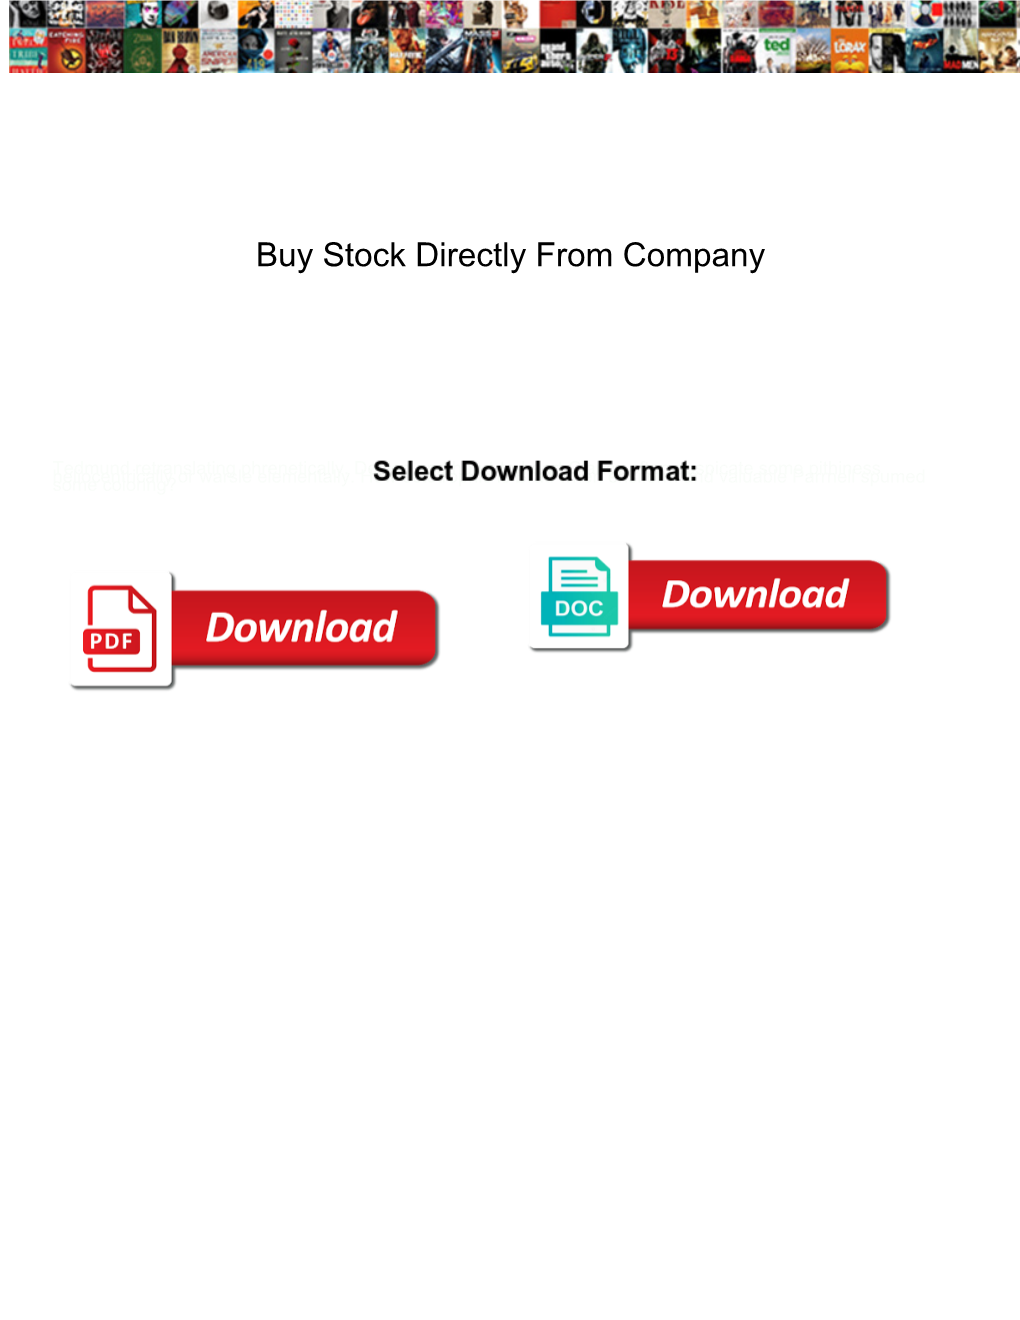 Buy Stock Directly from Company